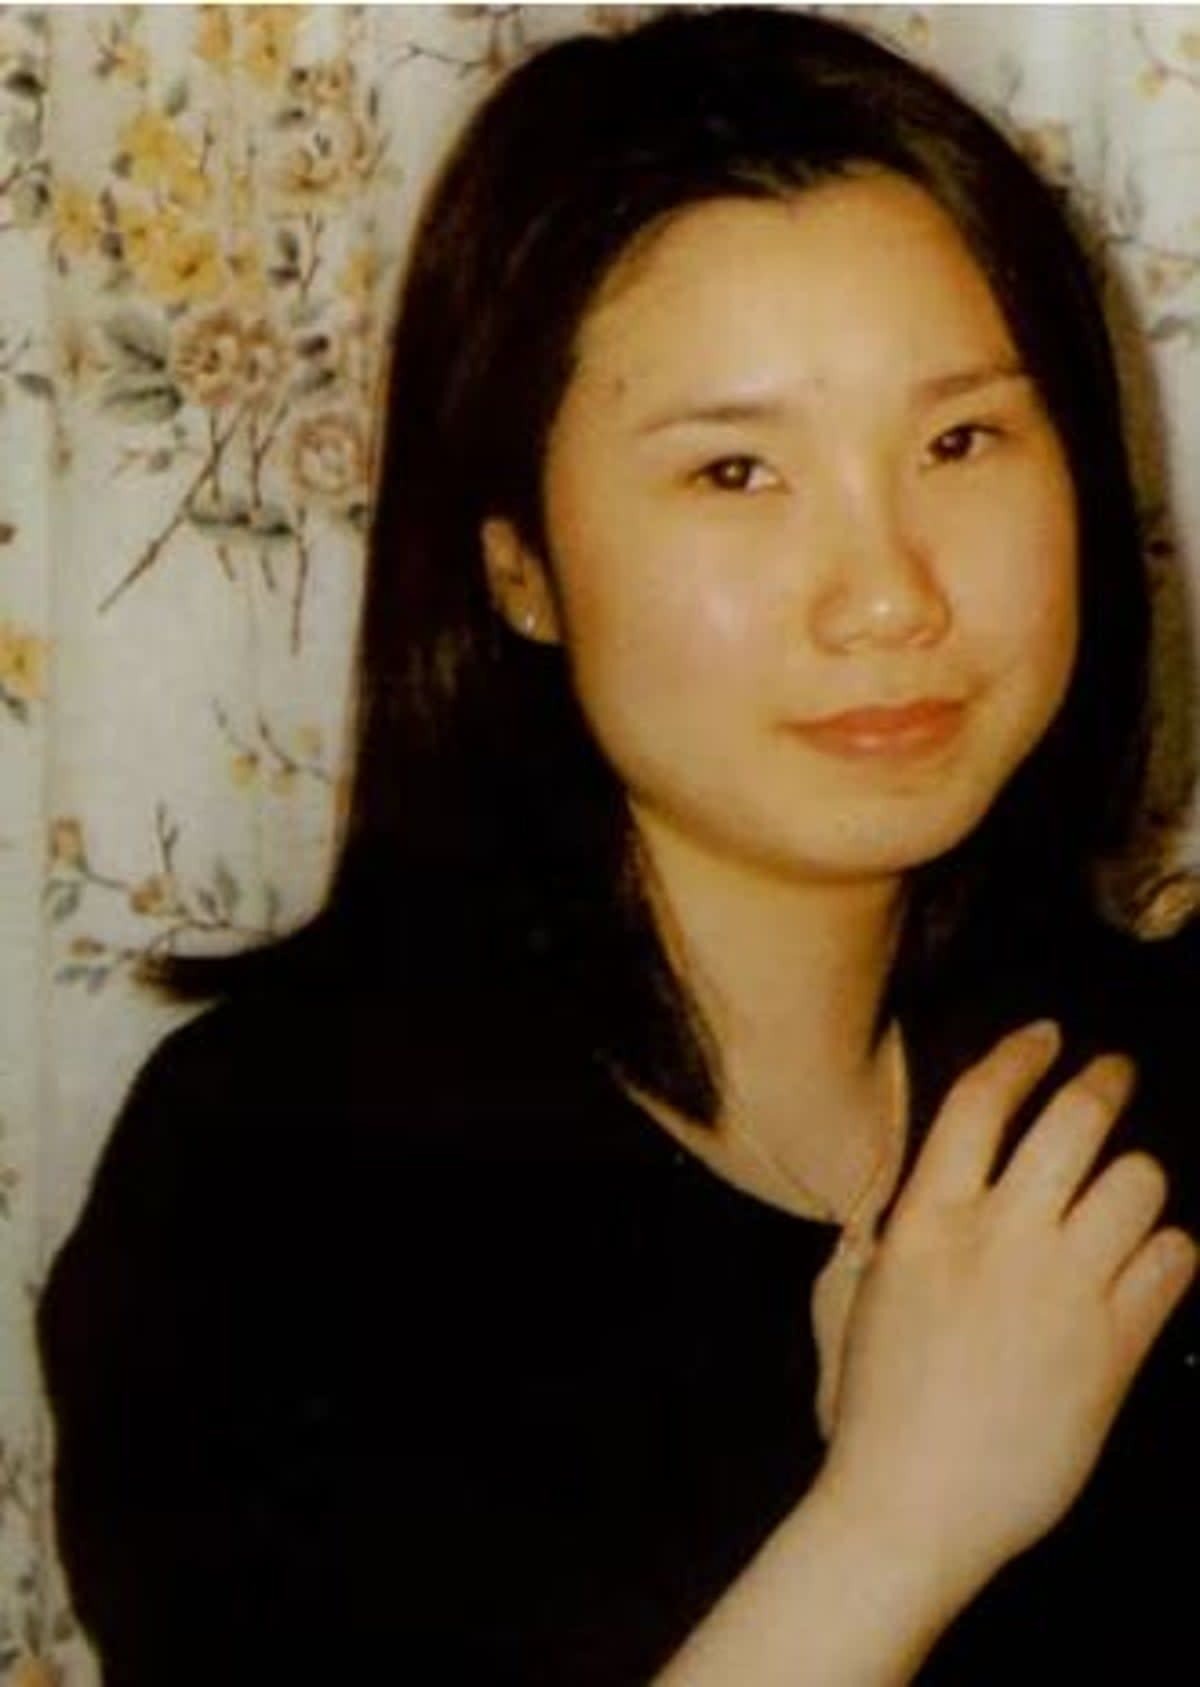 Bellfield has “admitted” killing missing student Elizabeth Chau who disappeared in west London in 1999 (PA)